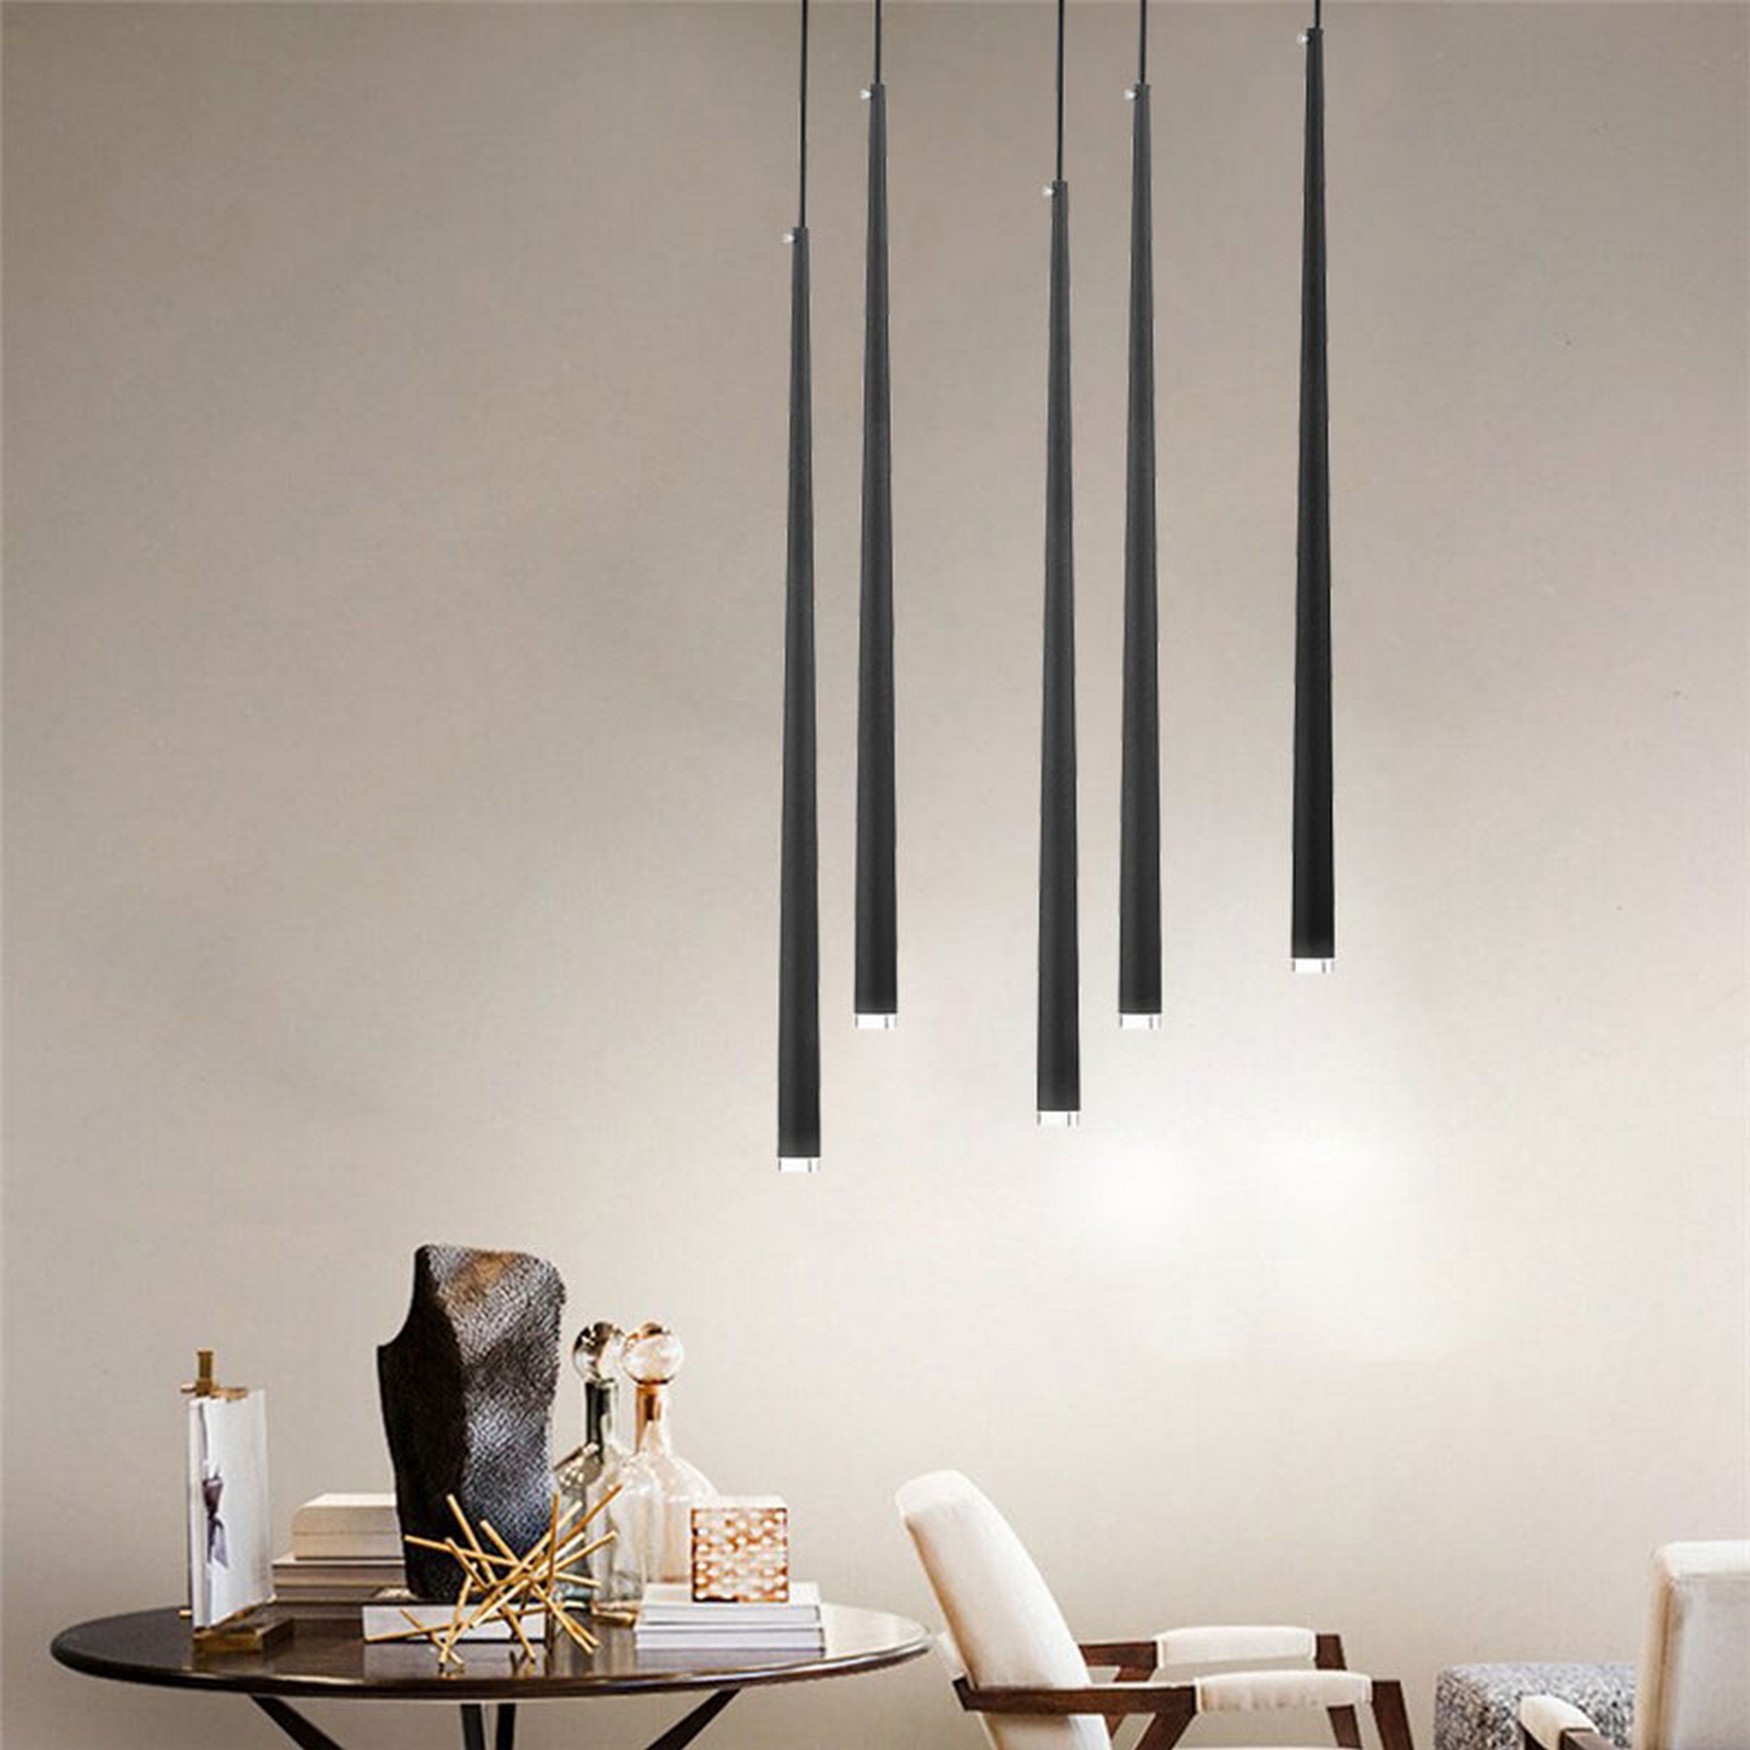 TRAY CLARION LED Pendant Light TRA83021Y 5*52cm 